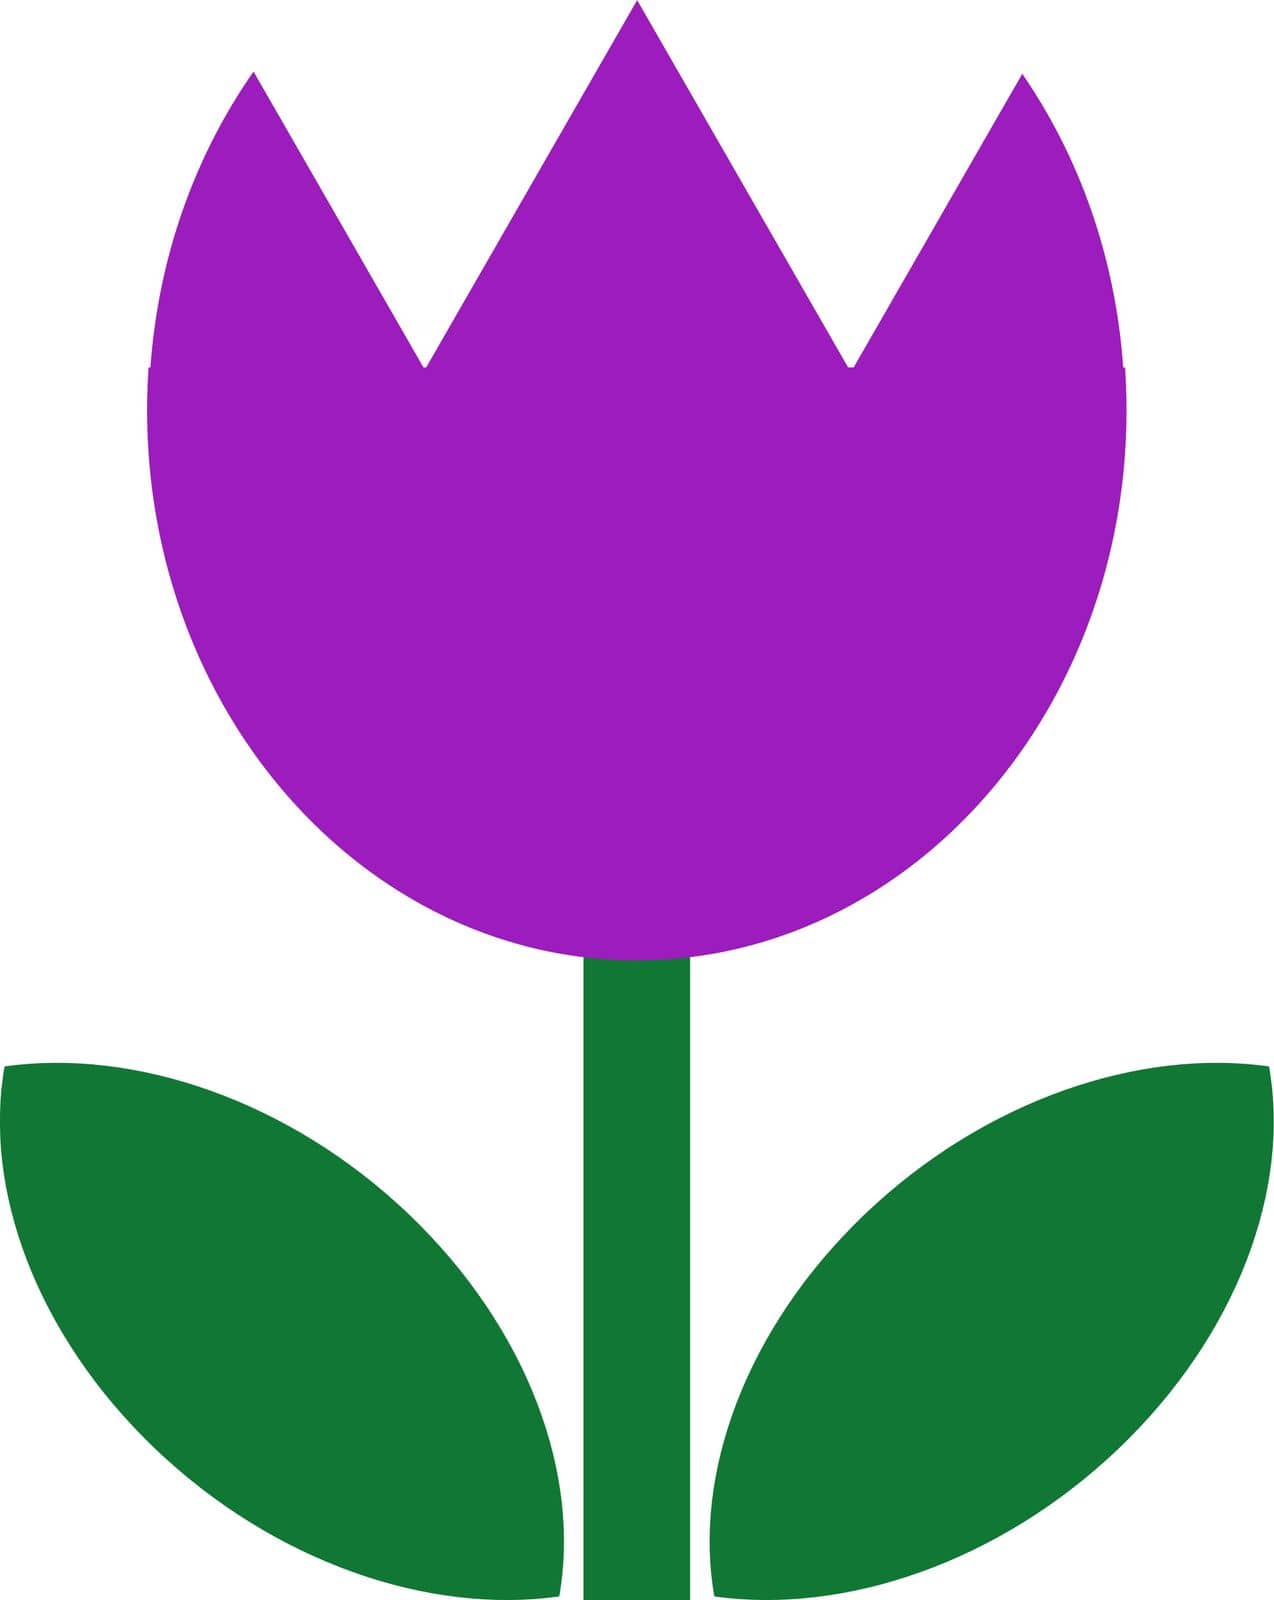 Tulip vector. Violet tulip icon on a white background.